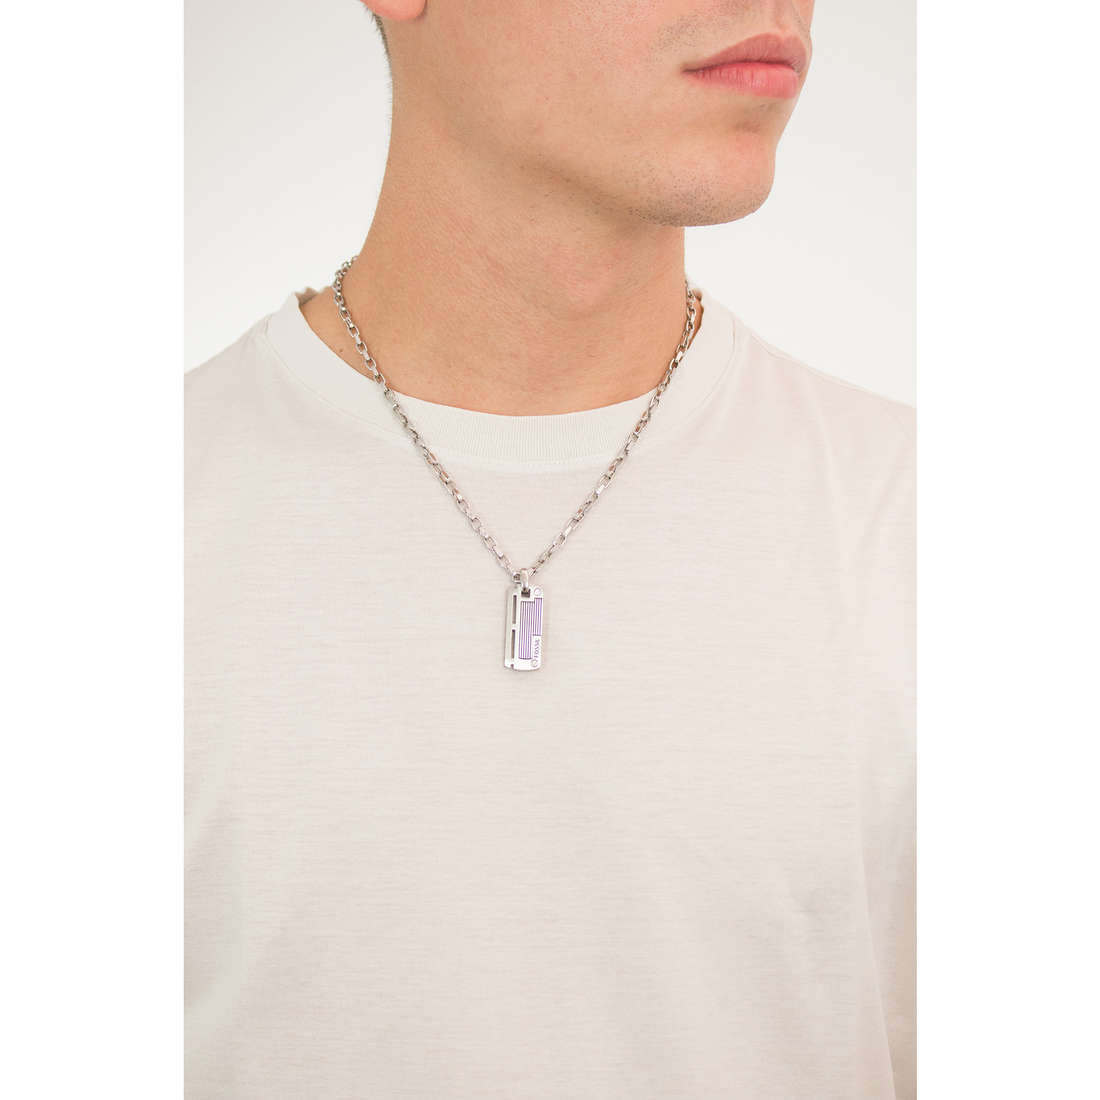 Fossil necklaces man JF84466040 wearing